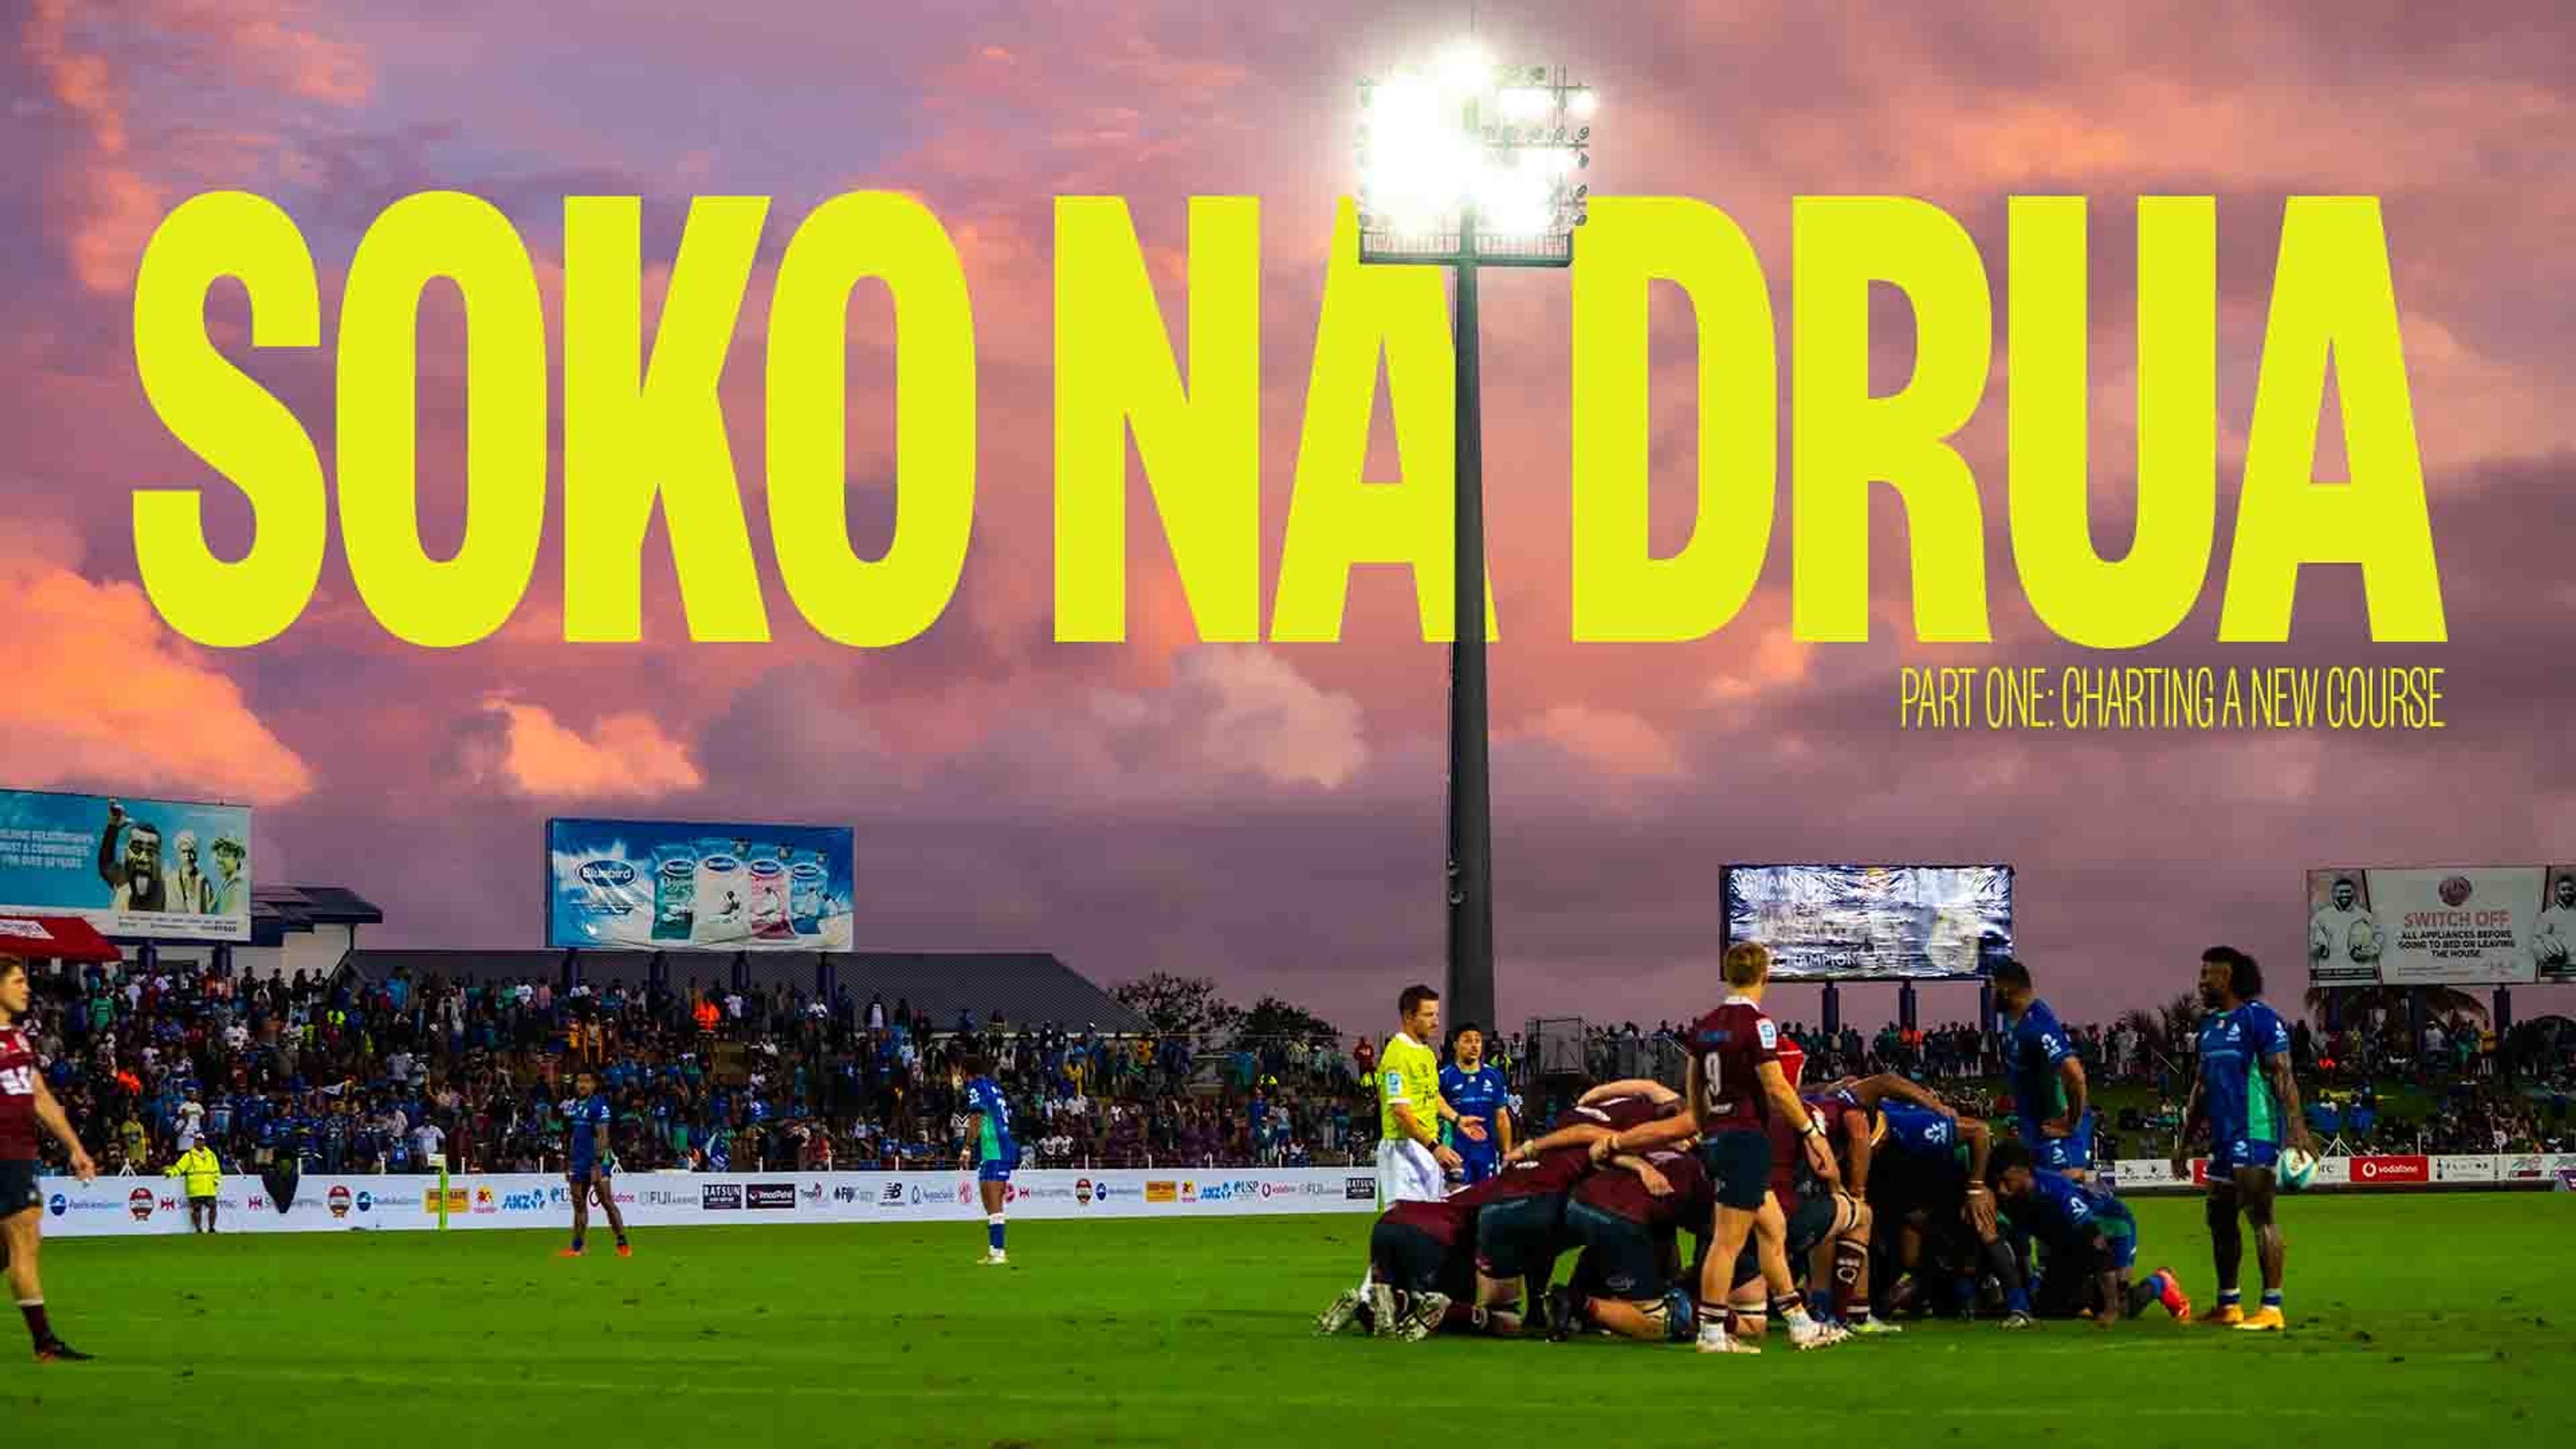 Soko Na Drua roughly translates to mean Drua sets sail, and as this documentary shows, the Fijian Drua Super Rugby team is set for big things. 